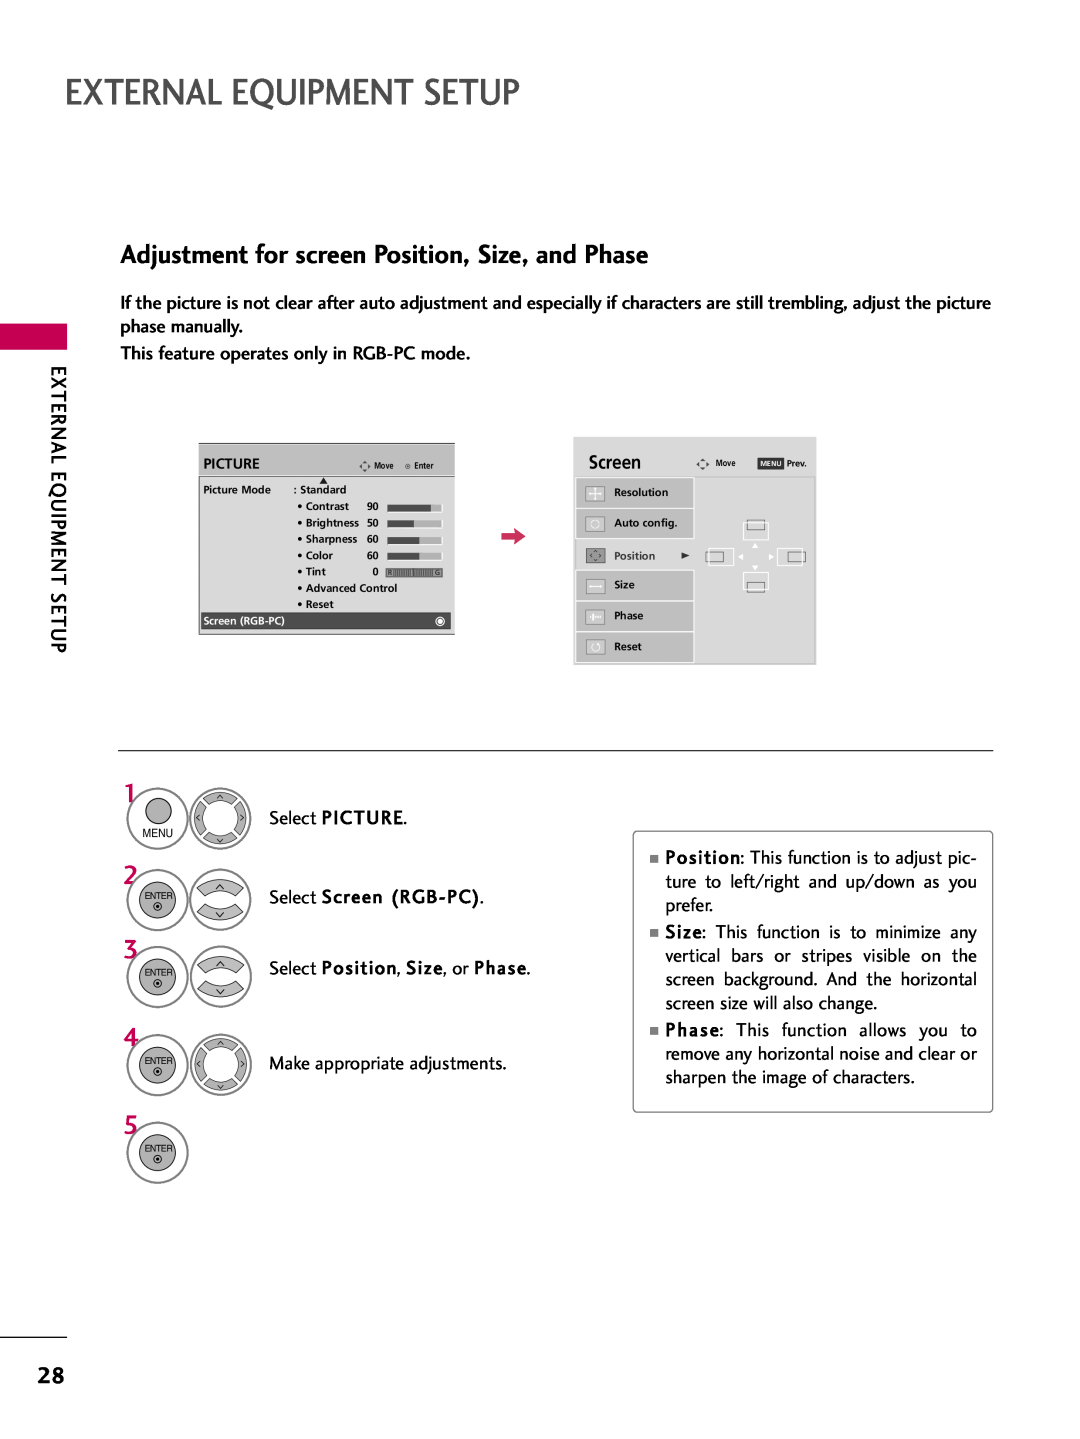 LG Electronics 42PQ12, 50PQ12 Adjustment for screen Position, Size, and Phase, External Equipment Setup, Screen, Menu 